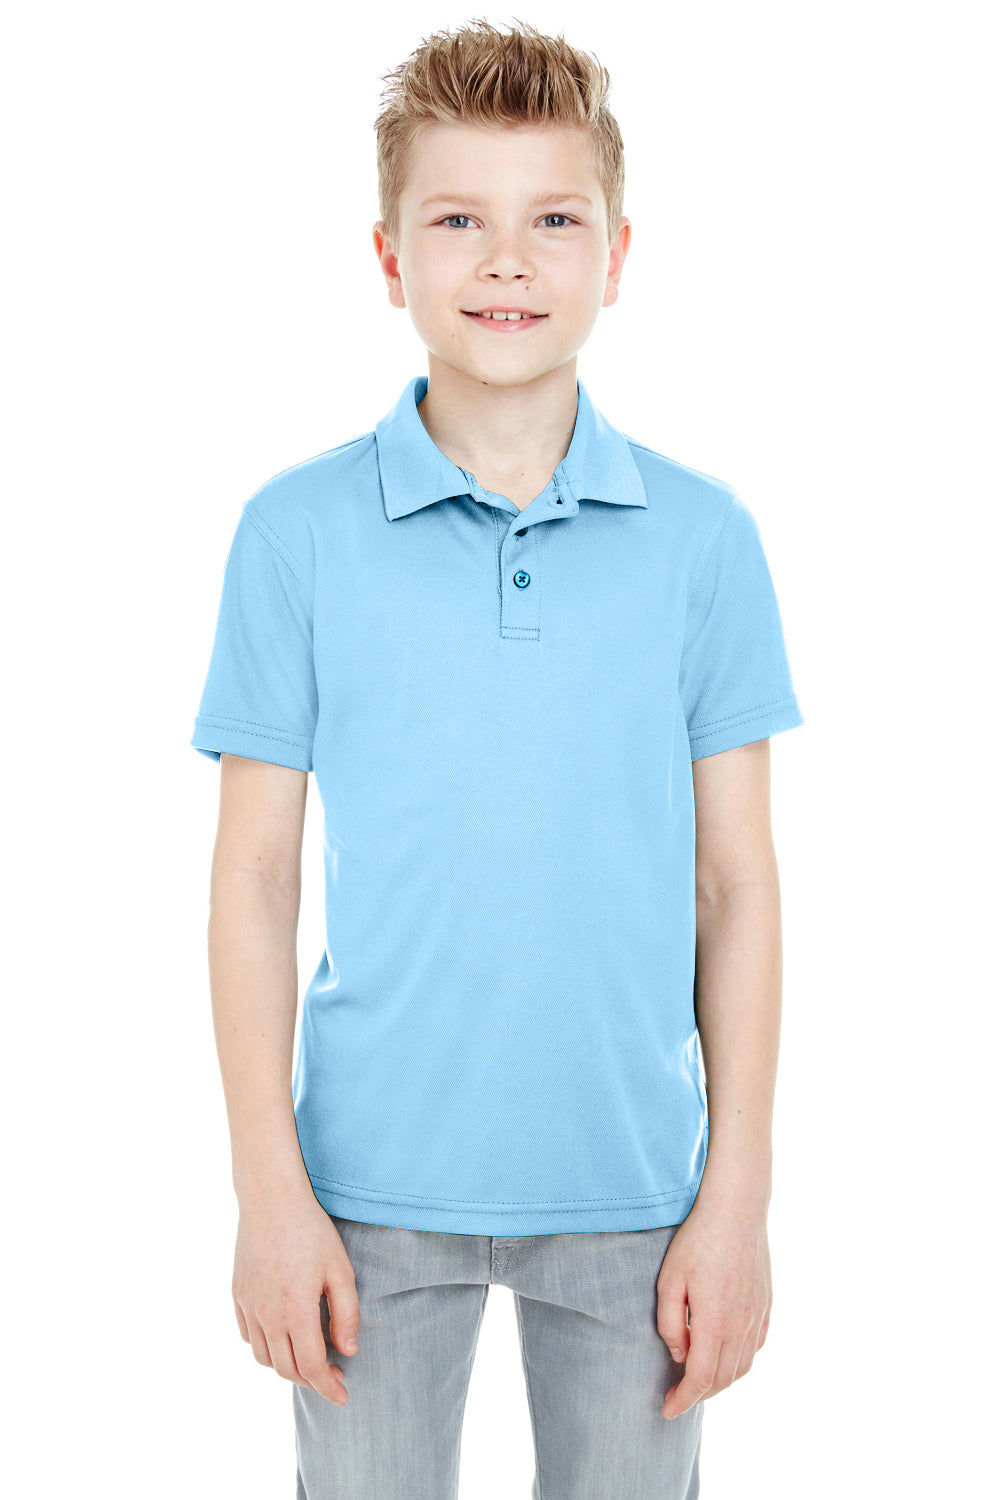 UltraClub 8210Y Youth Cool & Dry Moisture Wicking Short Sleeve Polo Shirt Columbia Blue Front